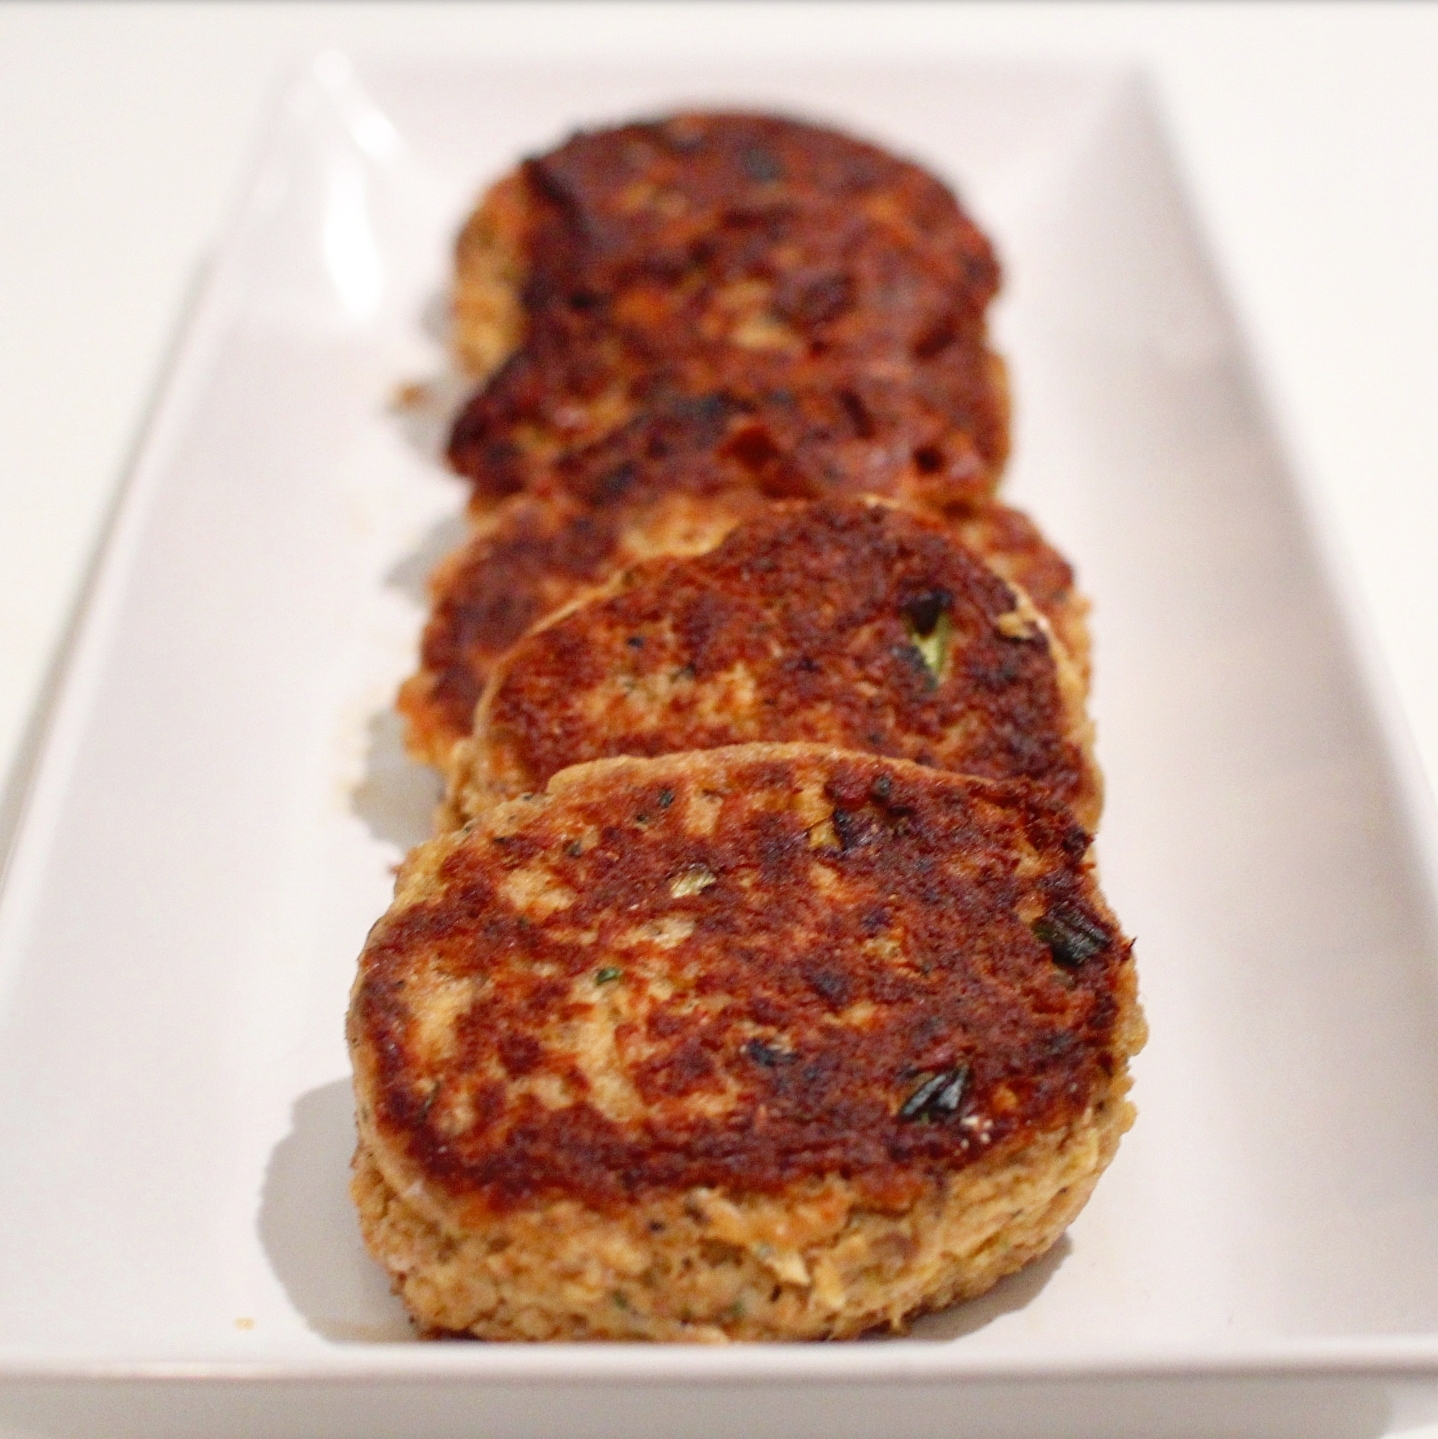 From My Kitchen: Salmon Cakes